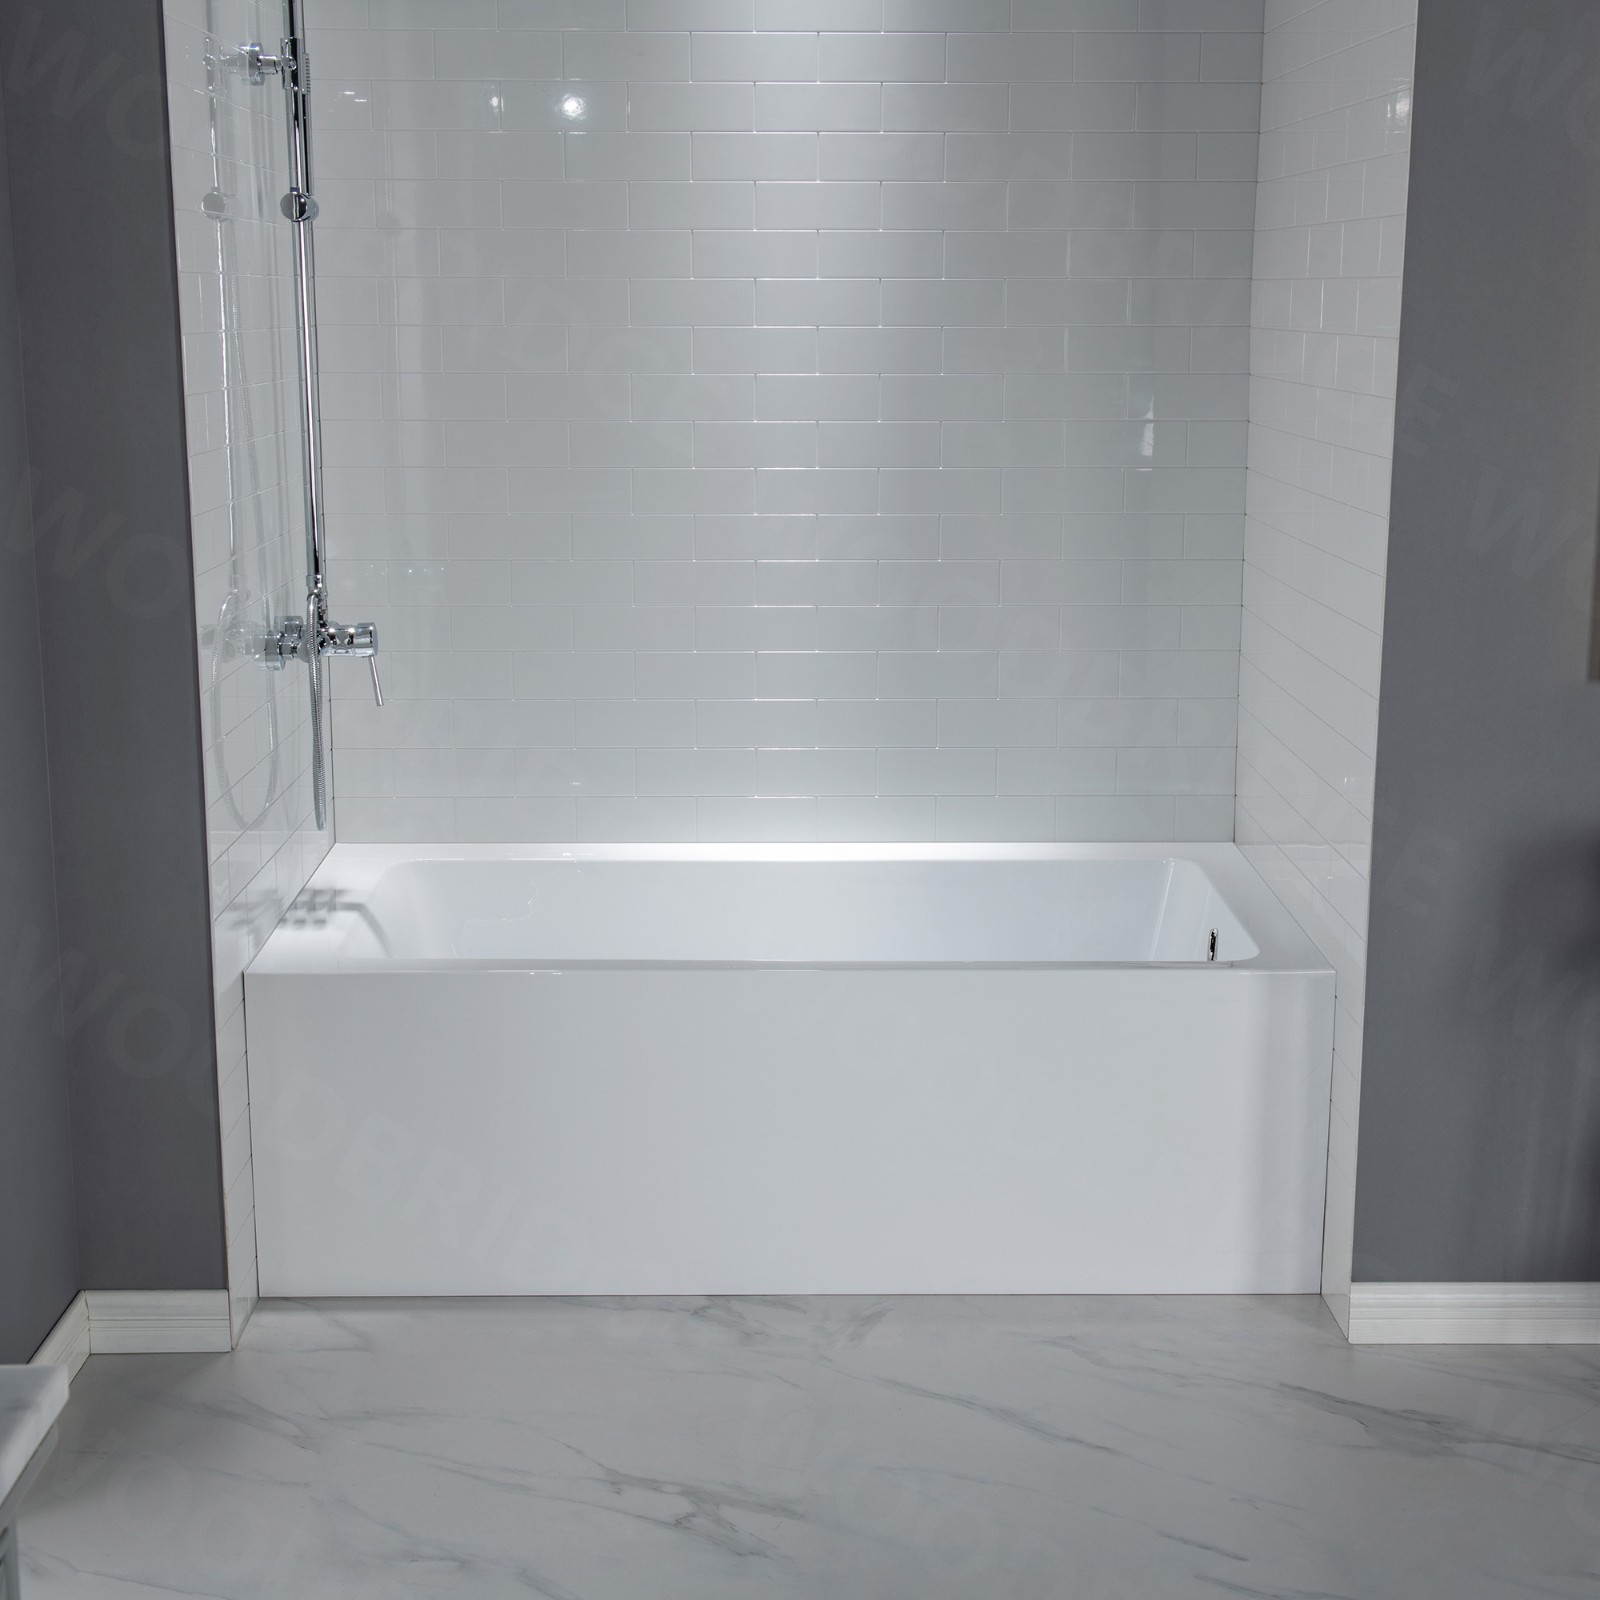  WOODBRIDGE 60-Inch Contemporary Alcove Acrylic Bathtub with Right Hand Drain and Overflow Holes, White_9575